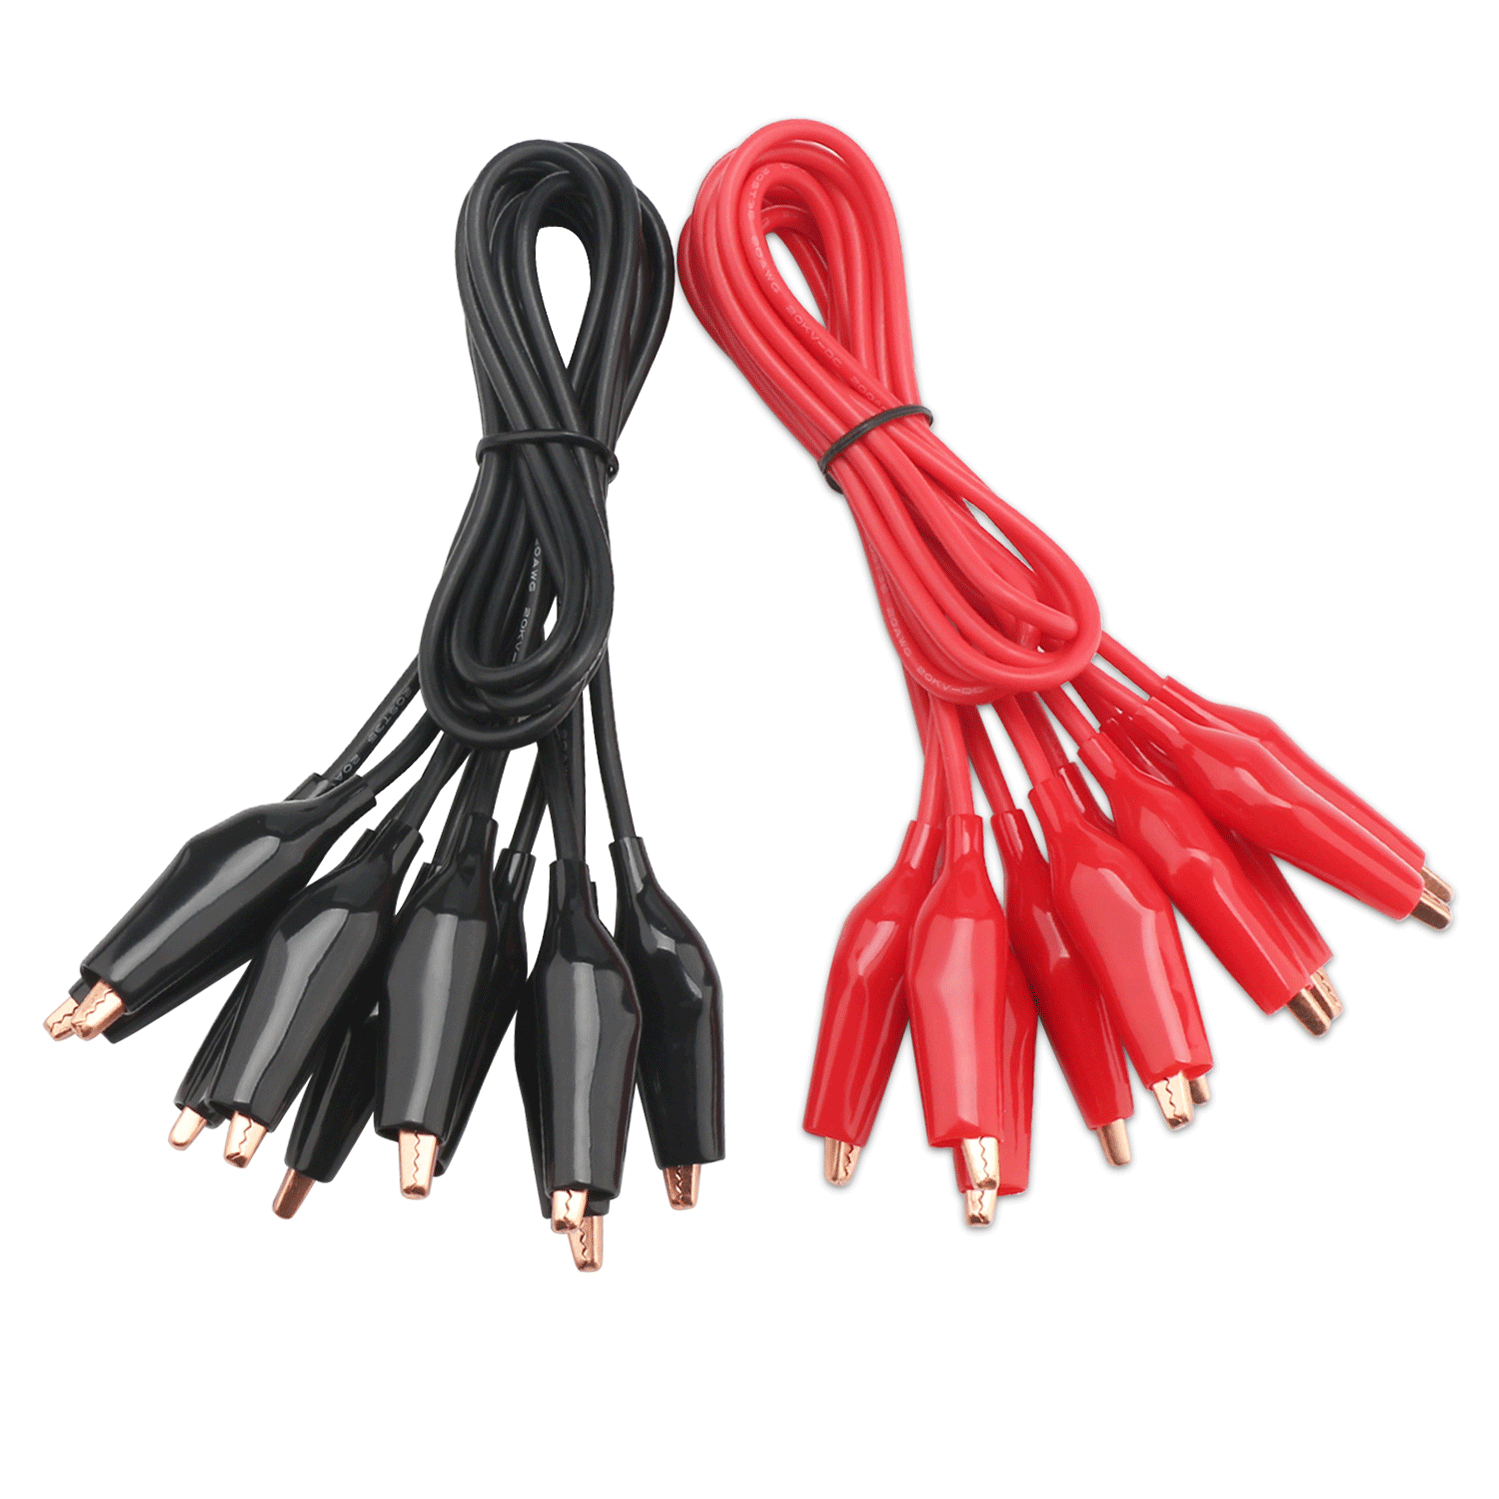 10 PCS/LOT Alligator Clips Electrical Cable Leads Double-ended Crocodile Roach Clip DIY Test Leads/Jumper Wire